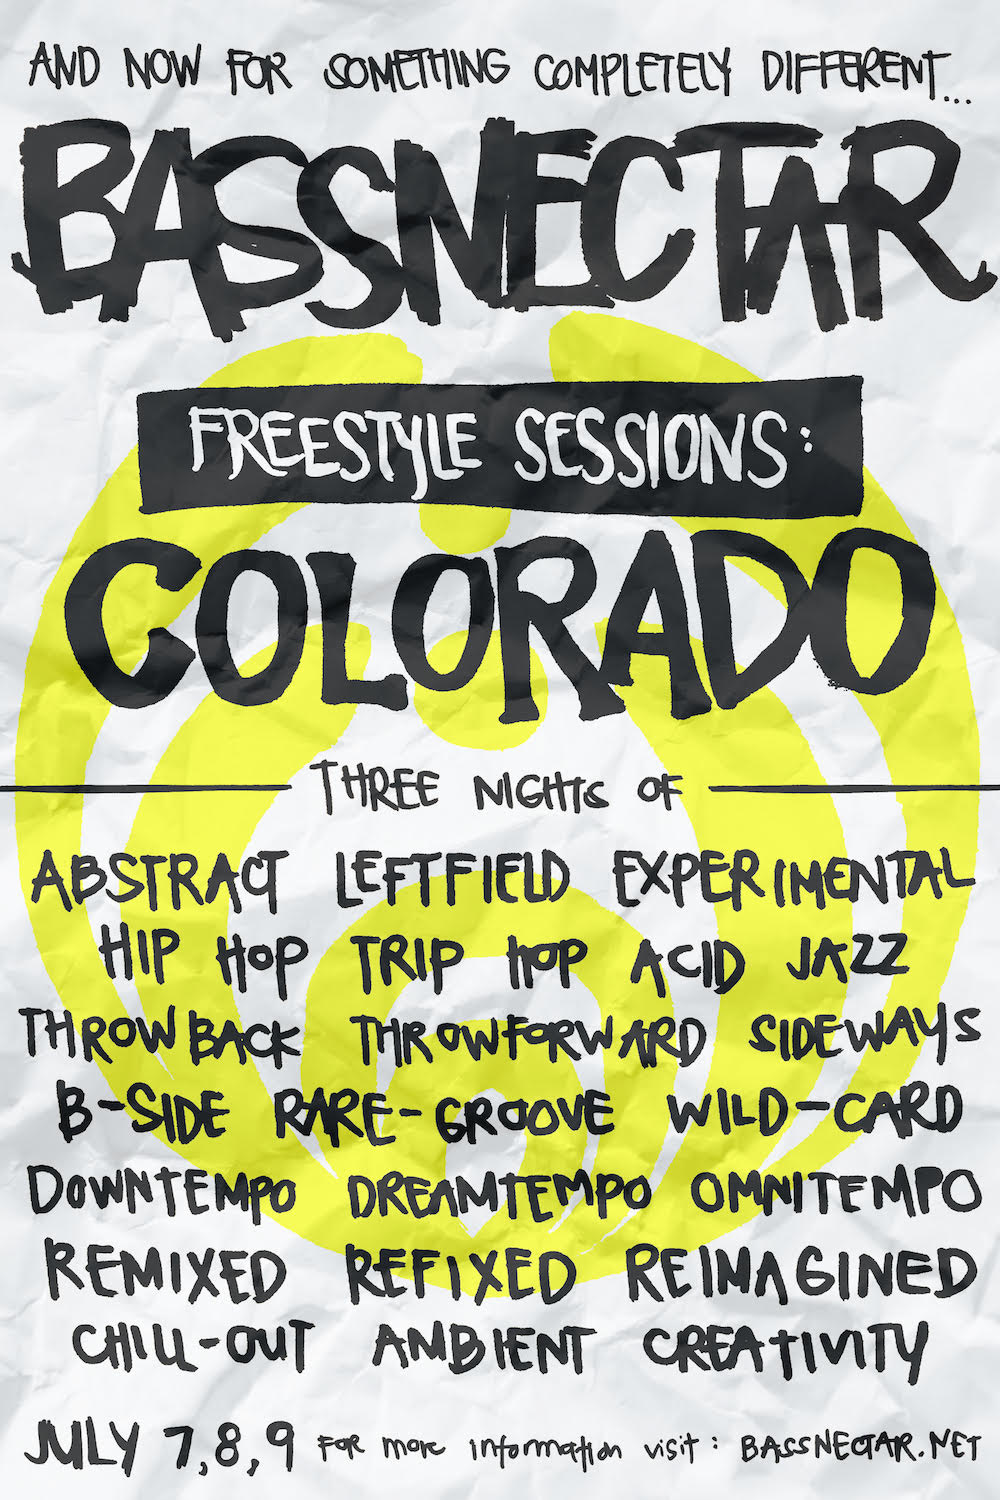 Bassnectar announces 3-day event, ‘Freestyle Sessions: Colorado’Bassnectar Freestyle Sessions Colorado 2017 1000p